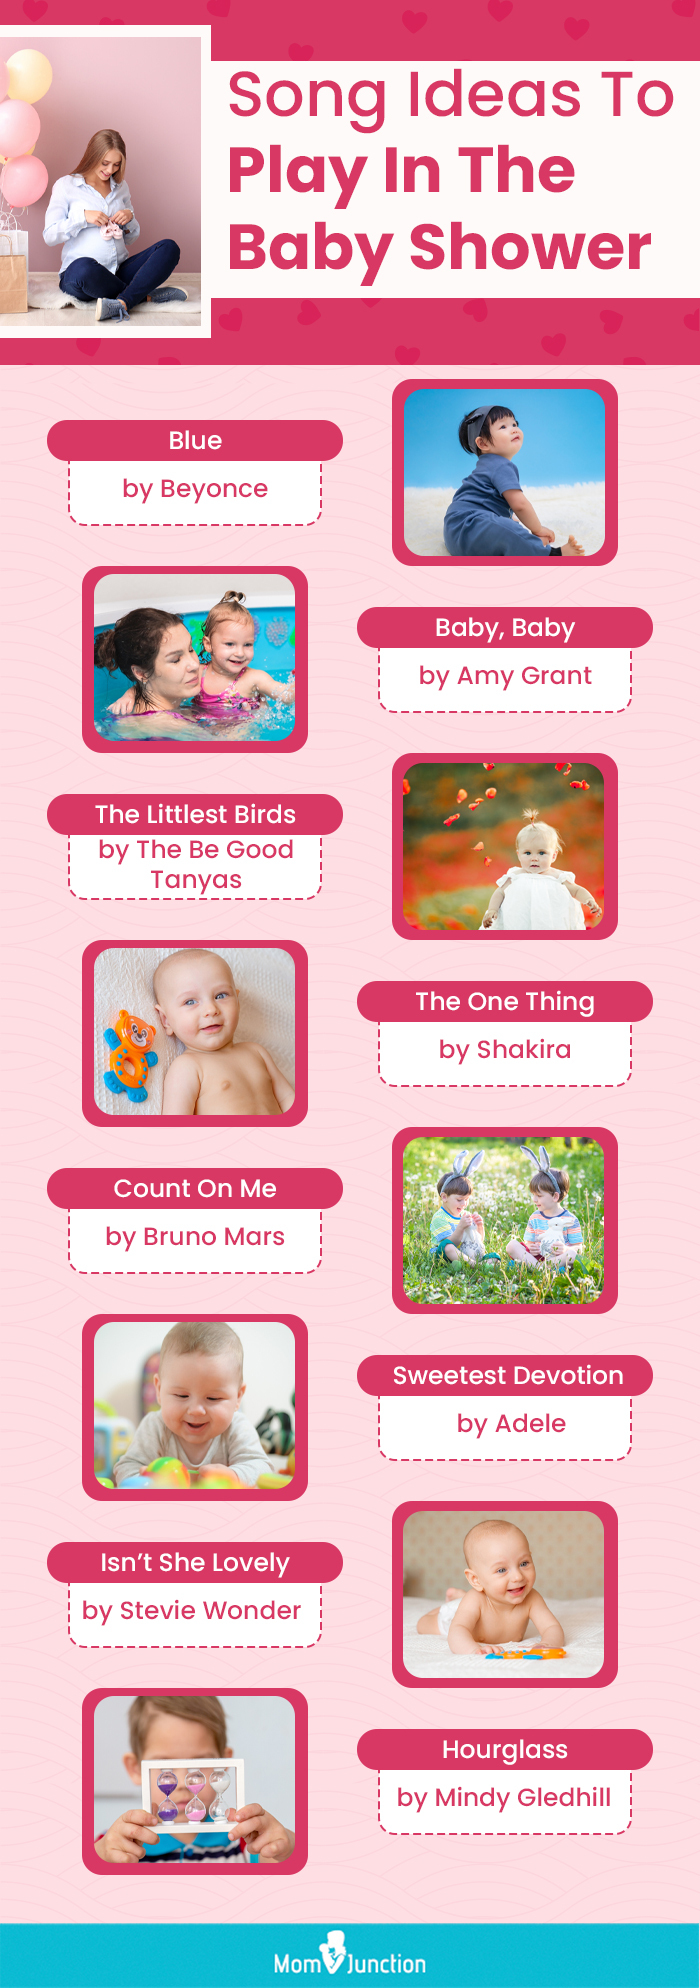 song ideas to play in the baby shower (infographic)